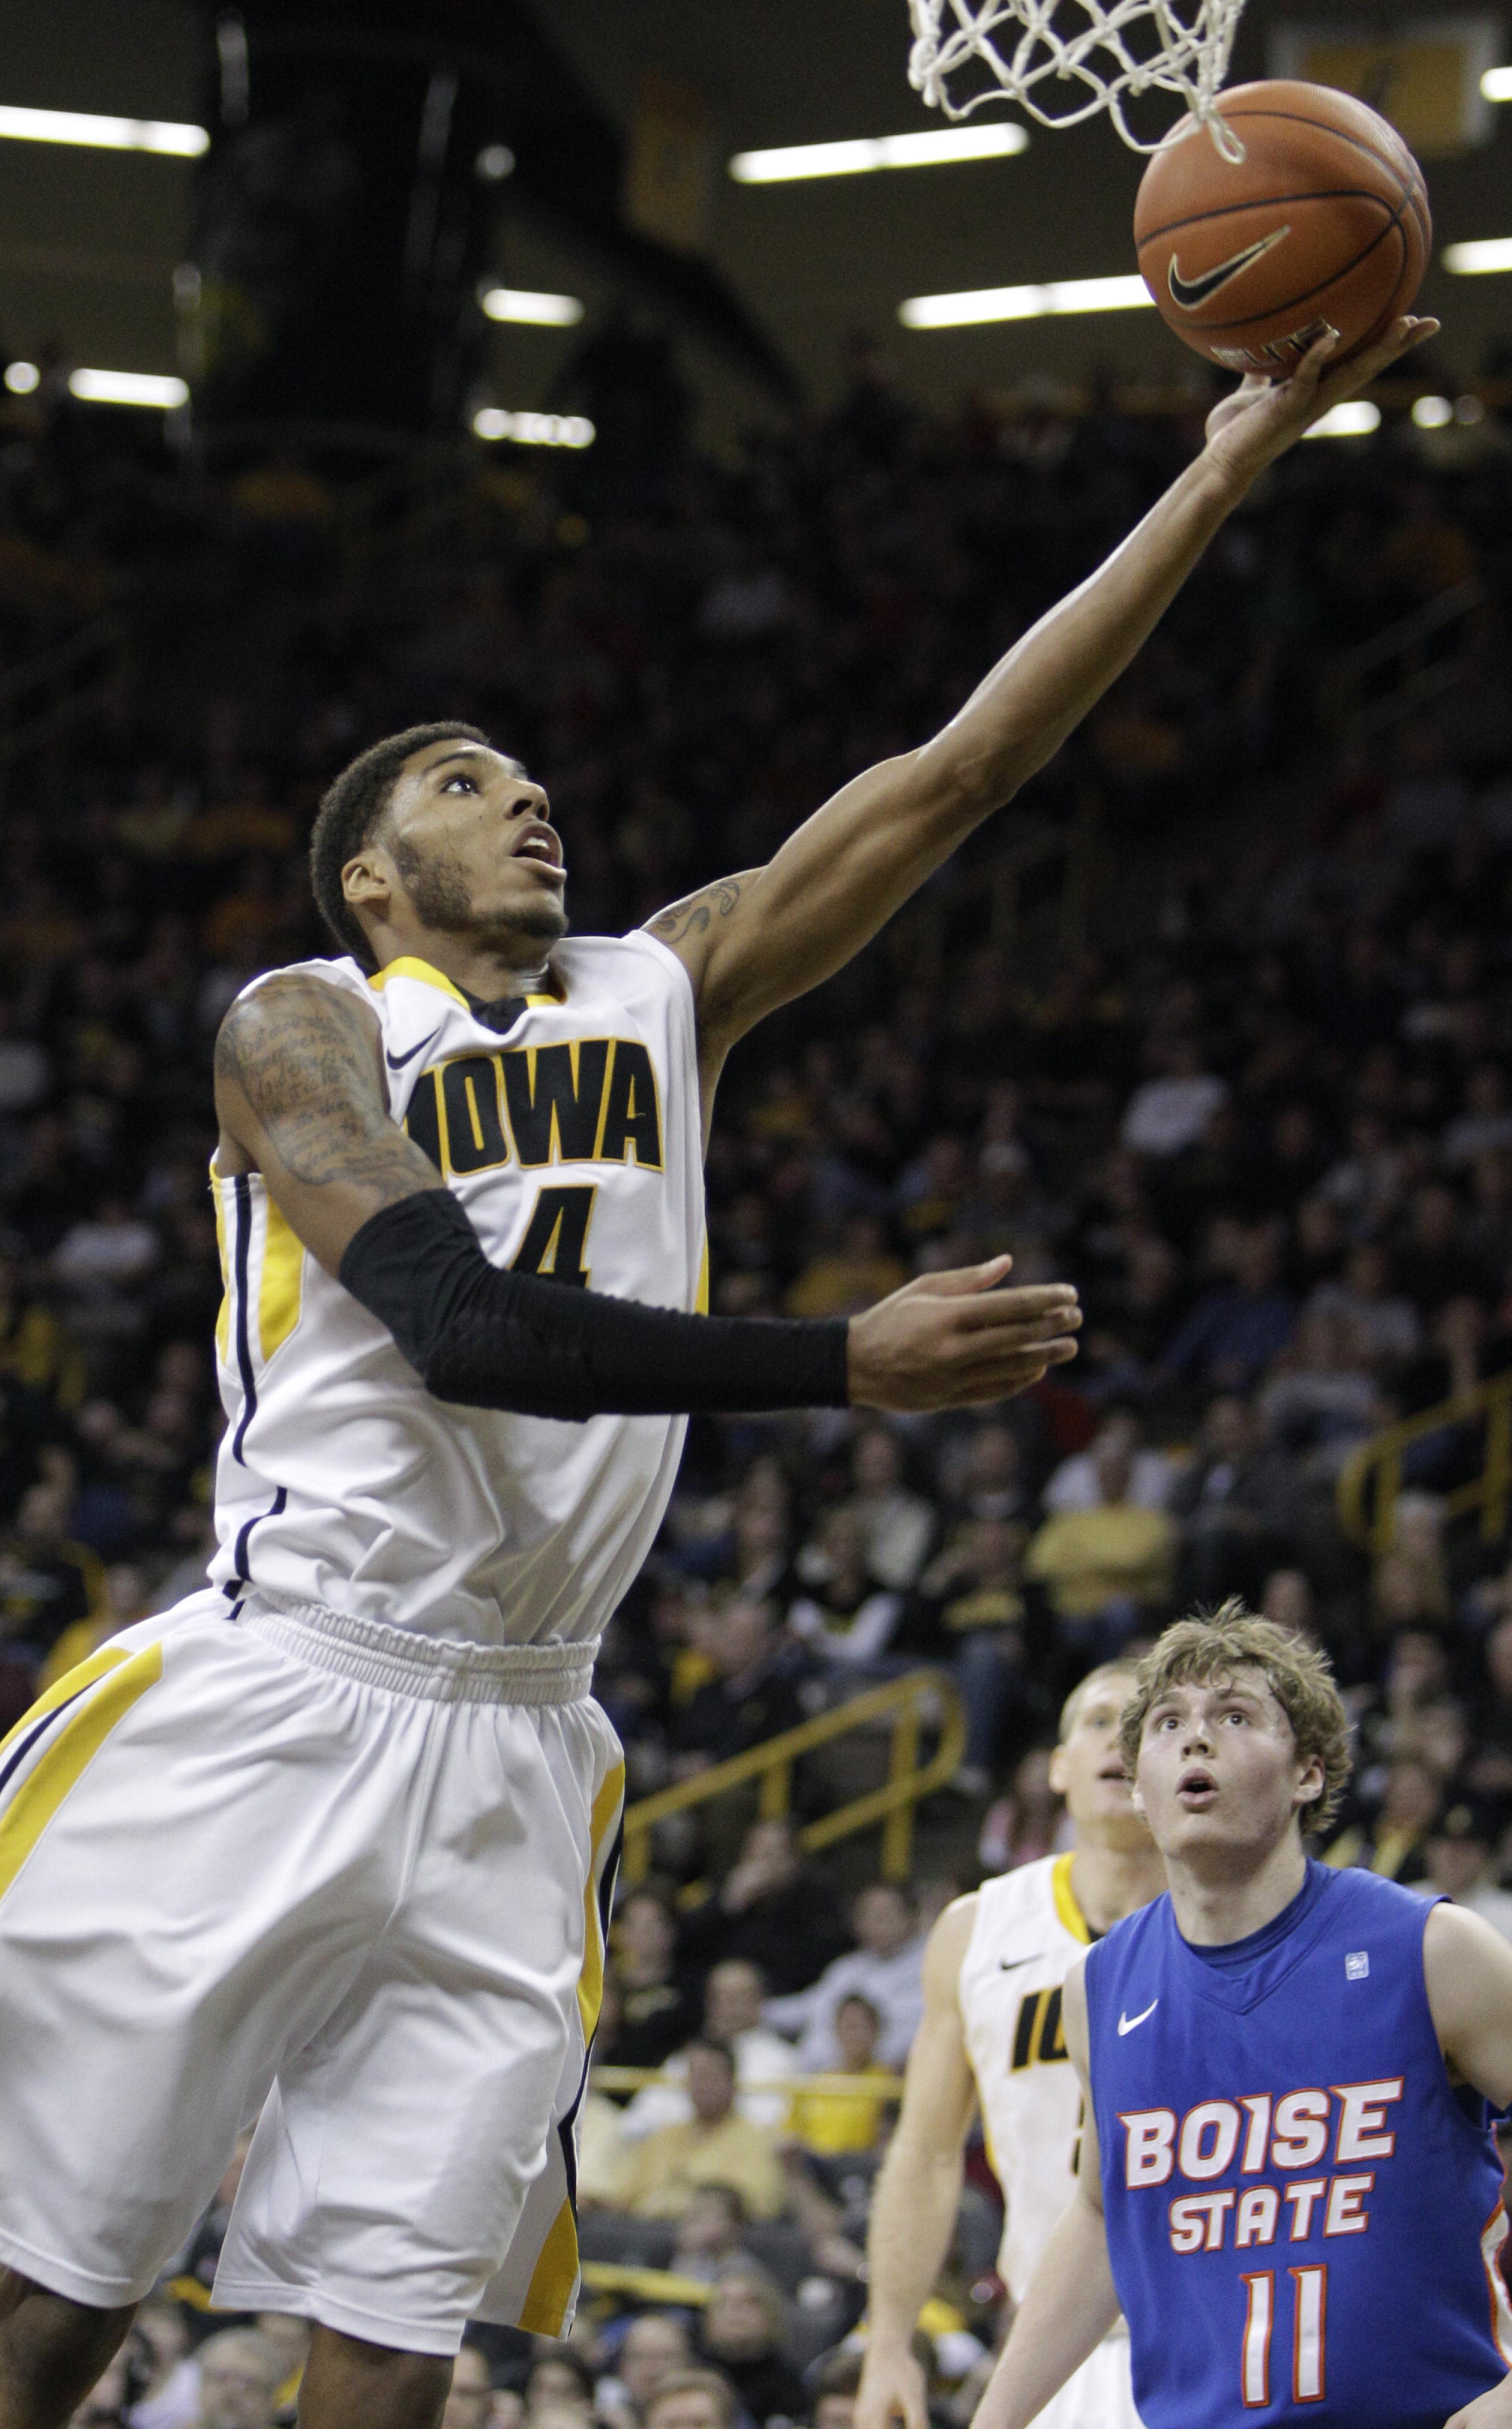 Marble leads the fast-paced Hawkeyes attack. (AP Photo/Charlie Neibergall)